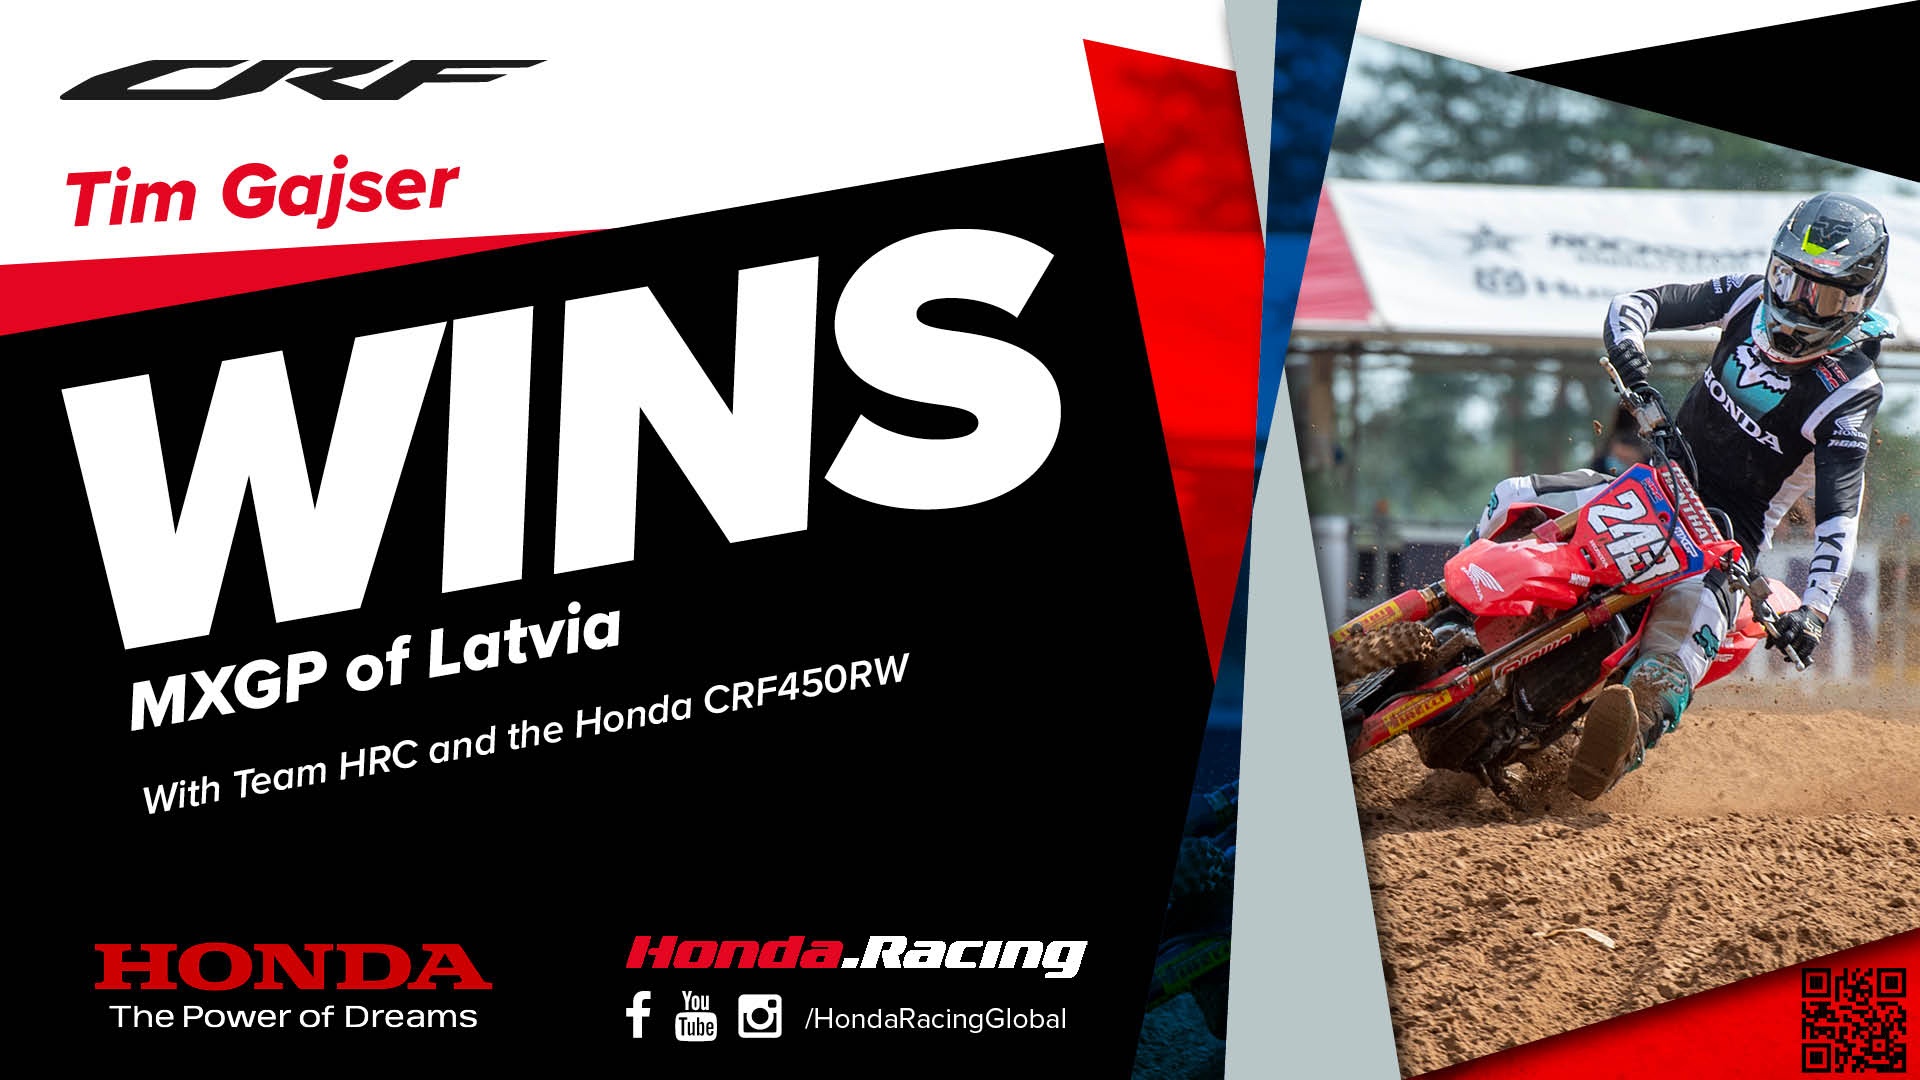 Team HRC’s Tim Gajser wins in Latvia and retains the red-plate